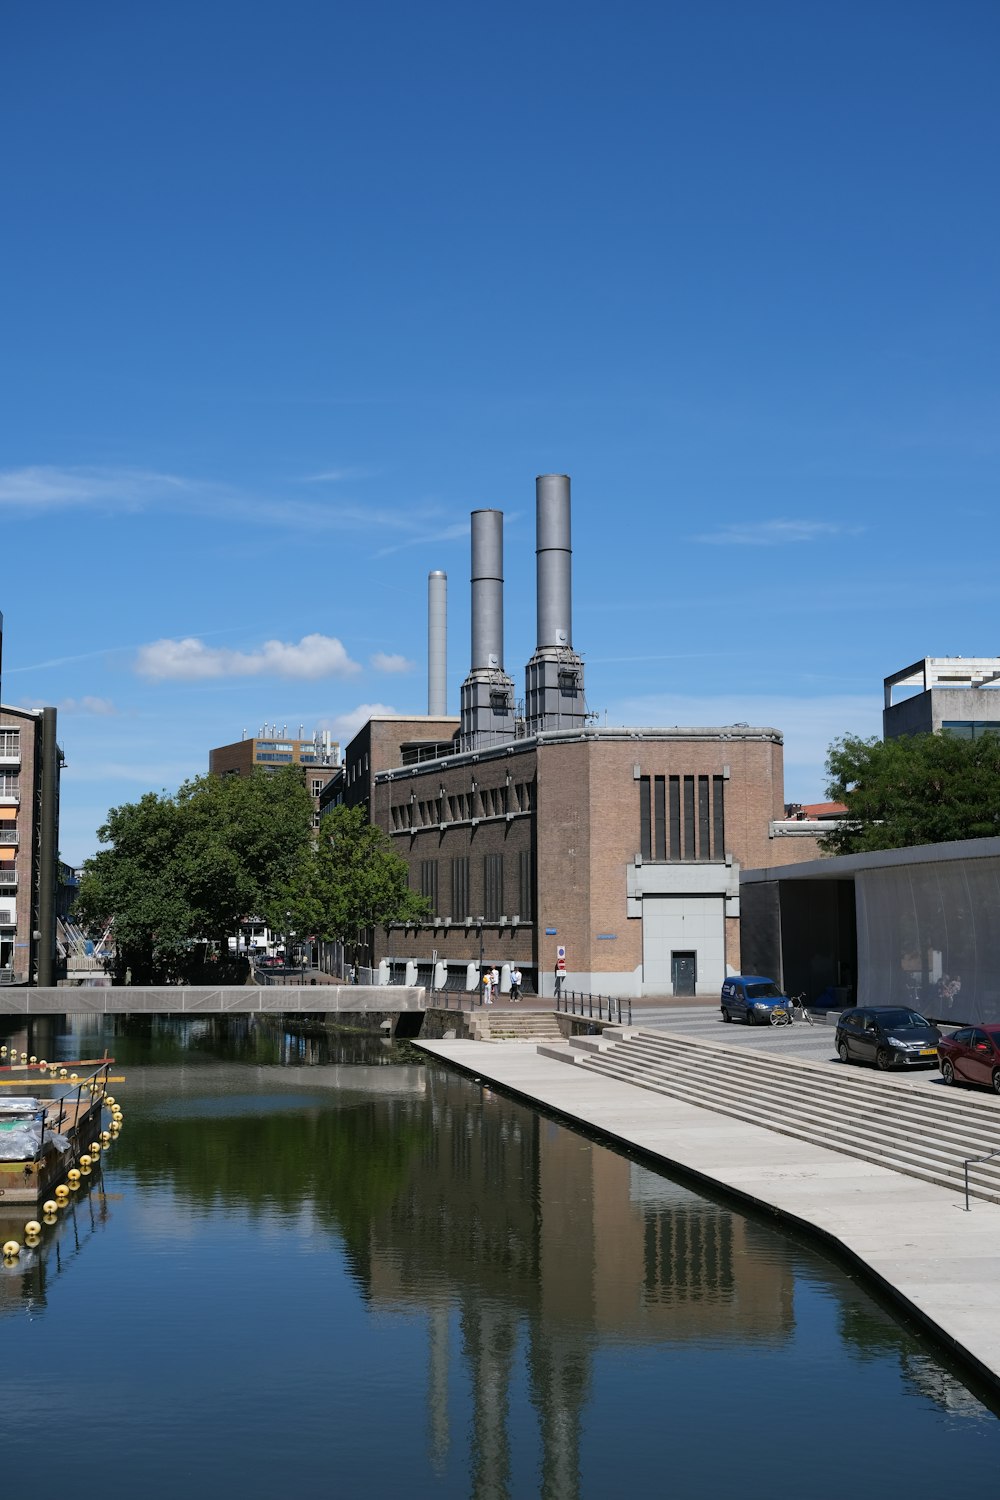 a building with smokestacks by a body of water